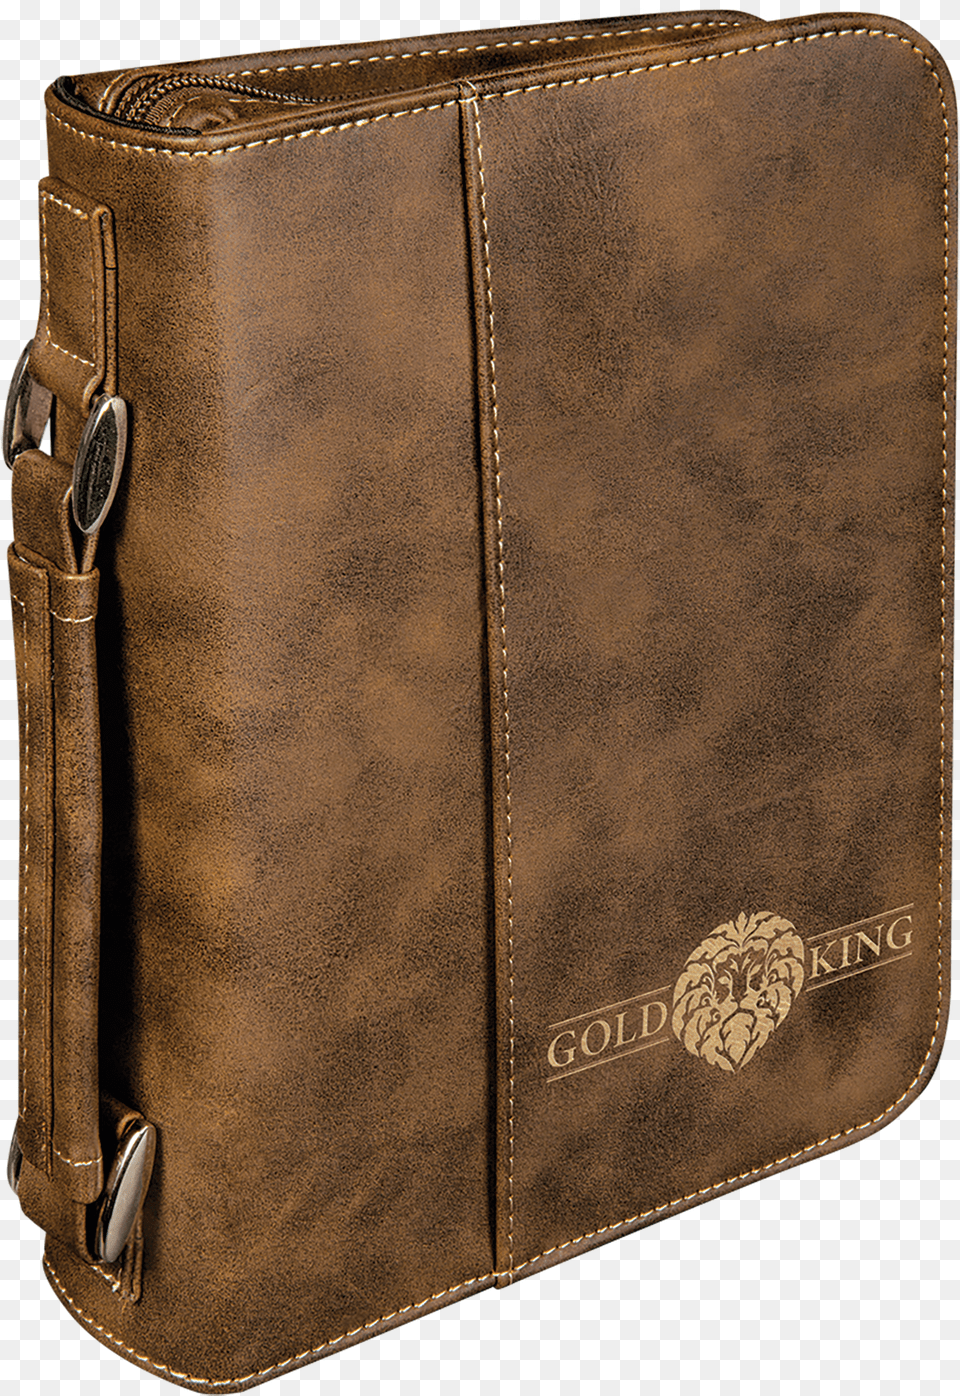 Rustic Amp Gold Leatherette Bookbible Cover With Handle, Accessories, Bag, Handbag Free Transparent Png